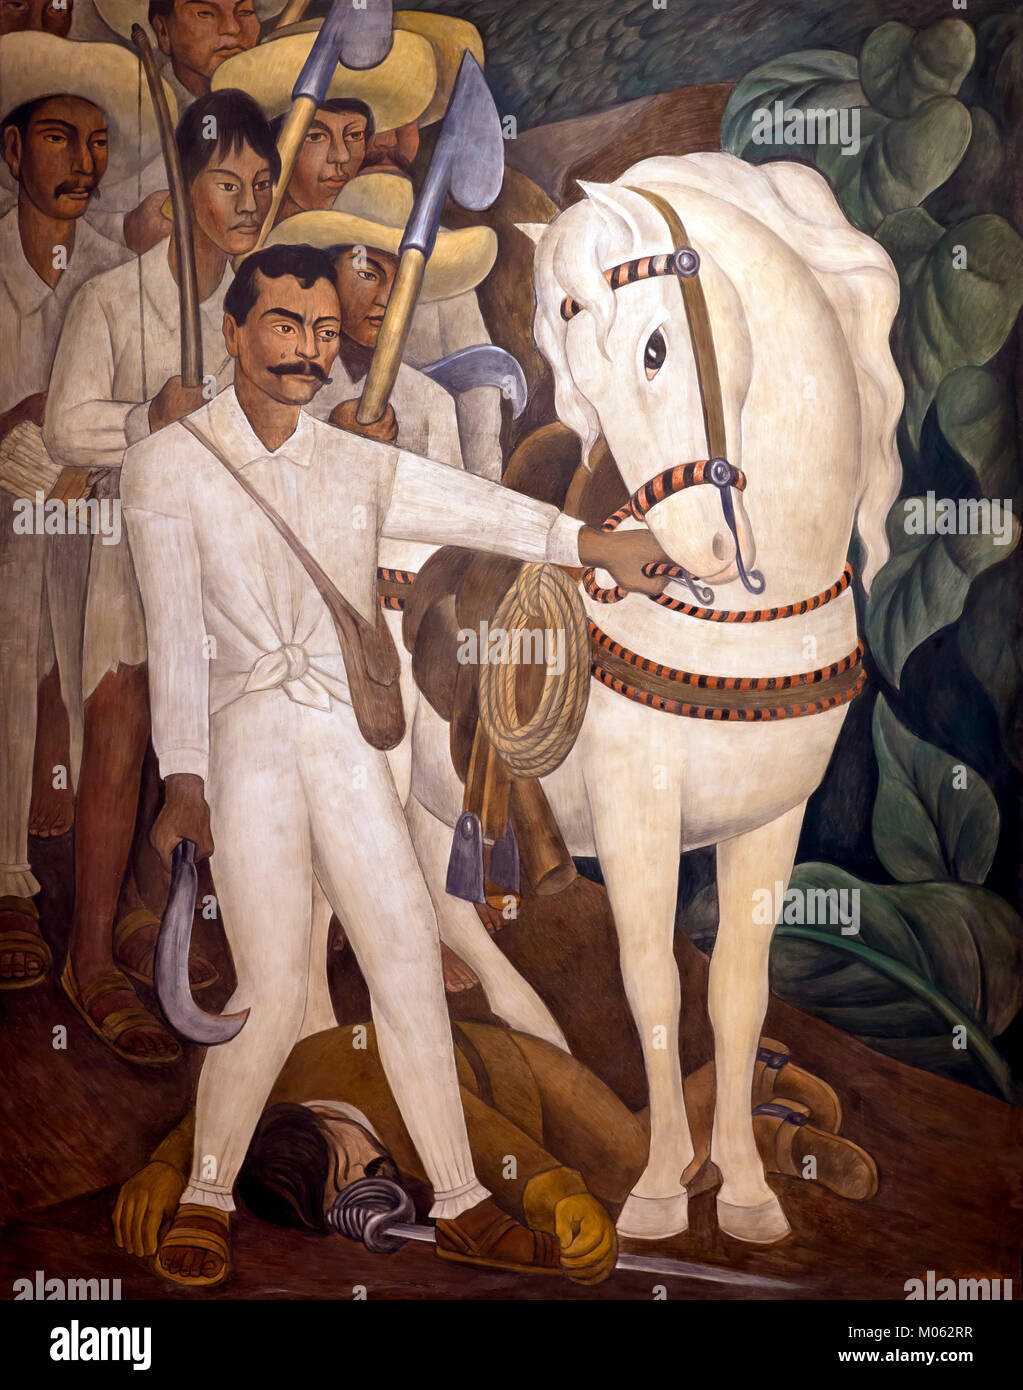 Leader agraire Zapata, Diego Rivera, 1931, Banque D'Images